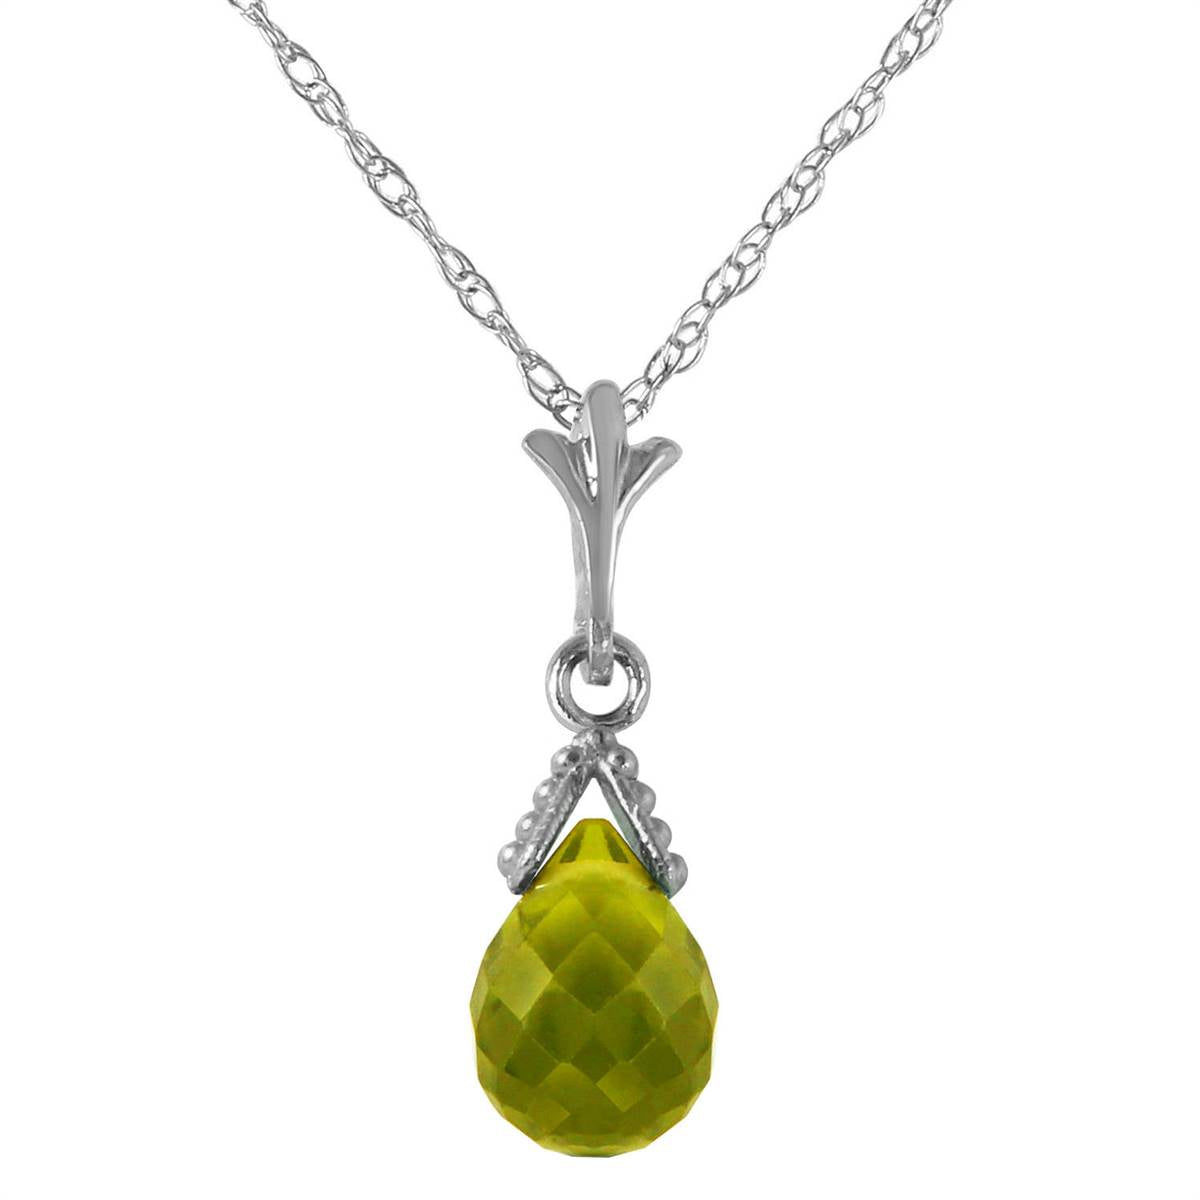 2.5 Carat 14K Solid White Gold Midst Of Memory Peridot Necklace